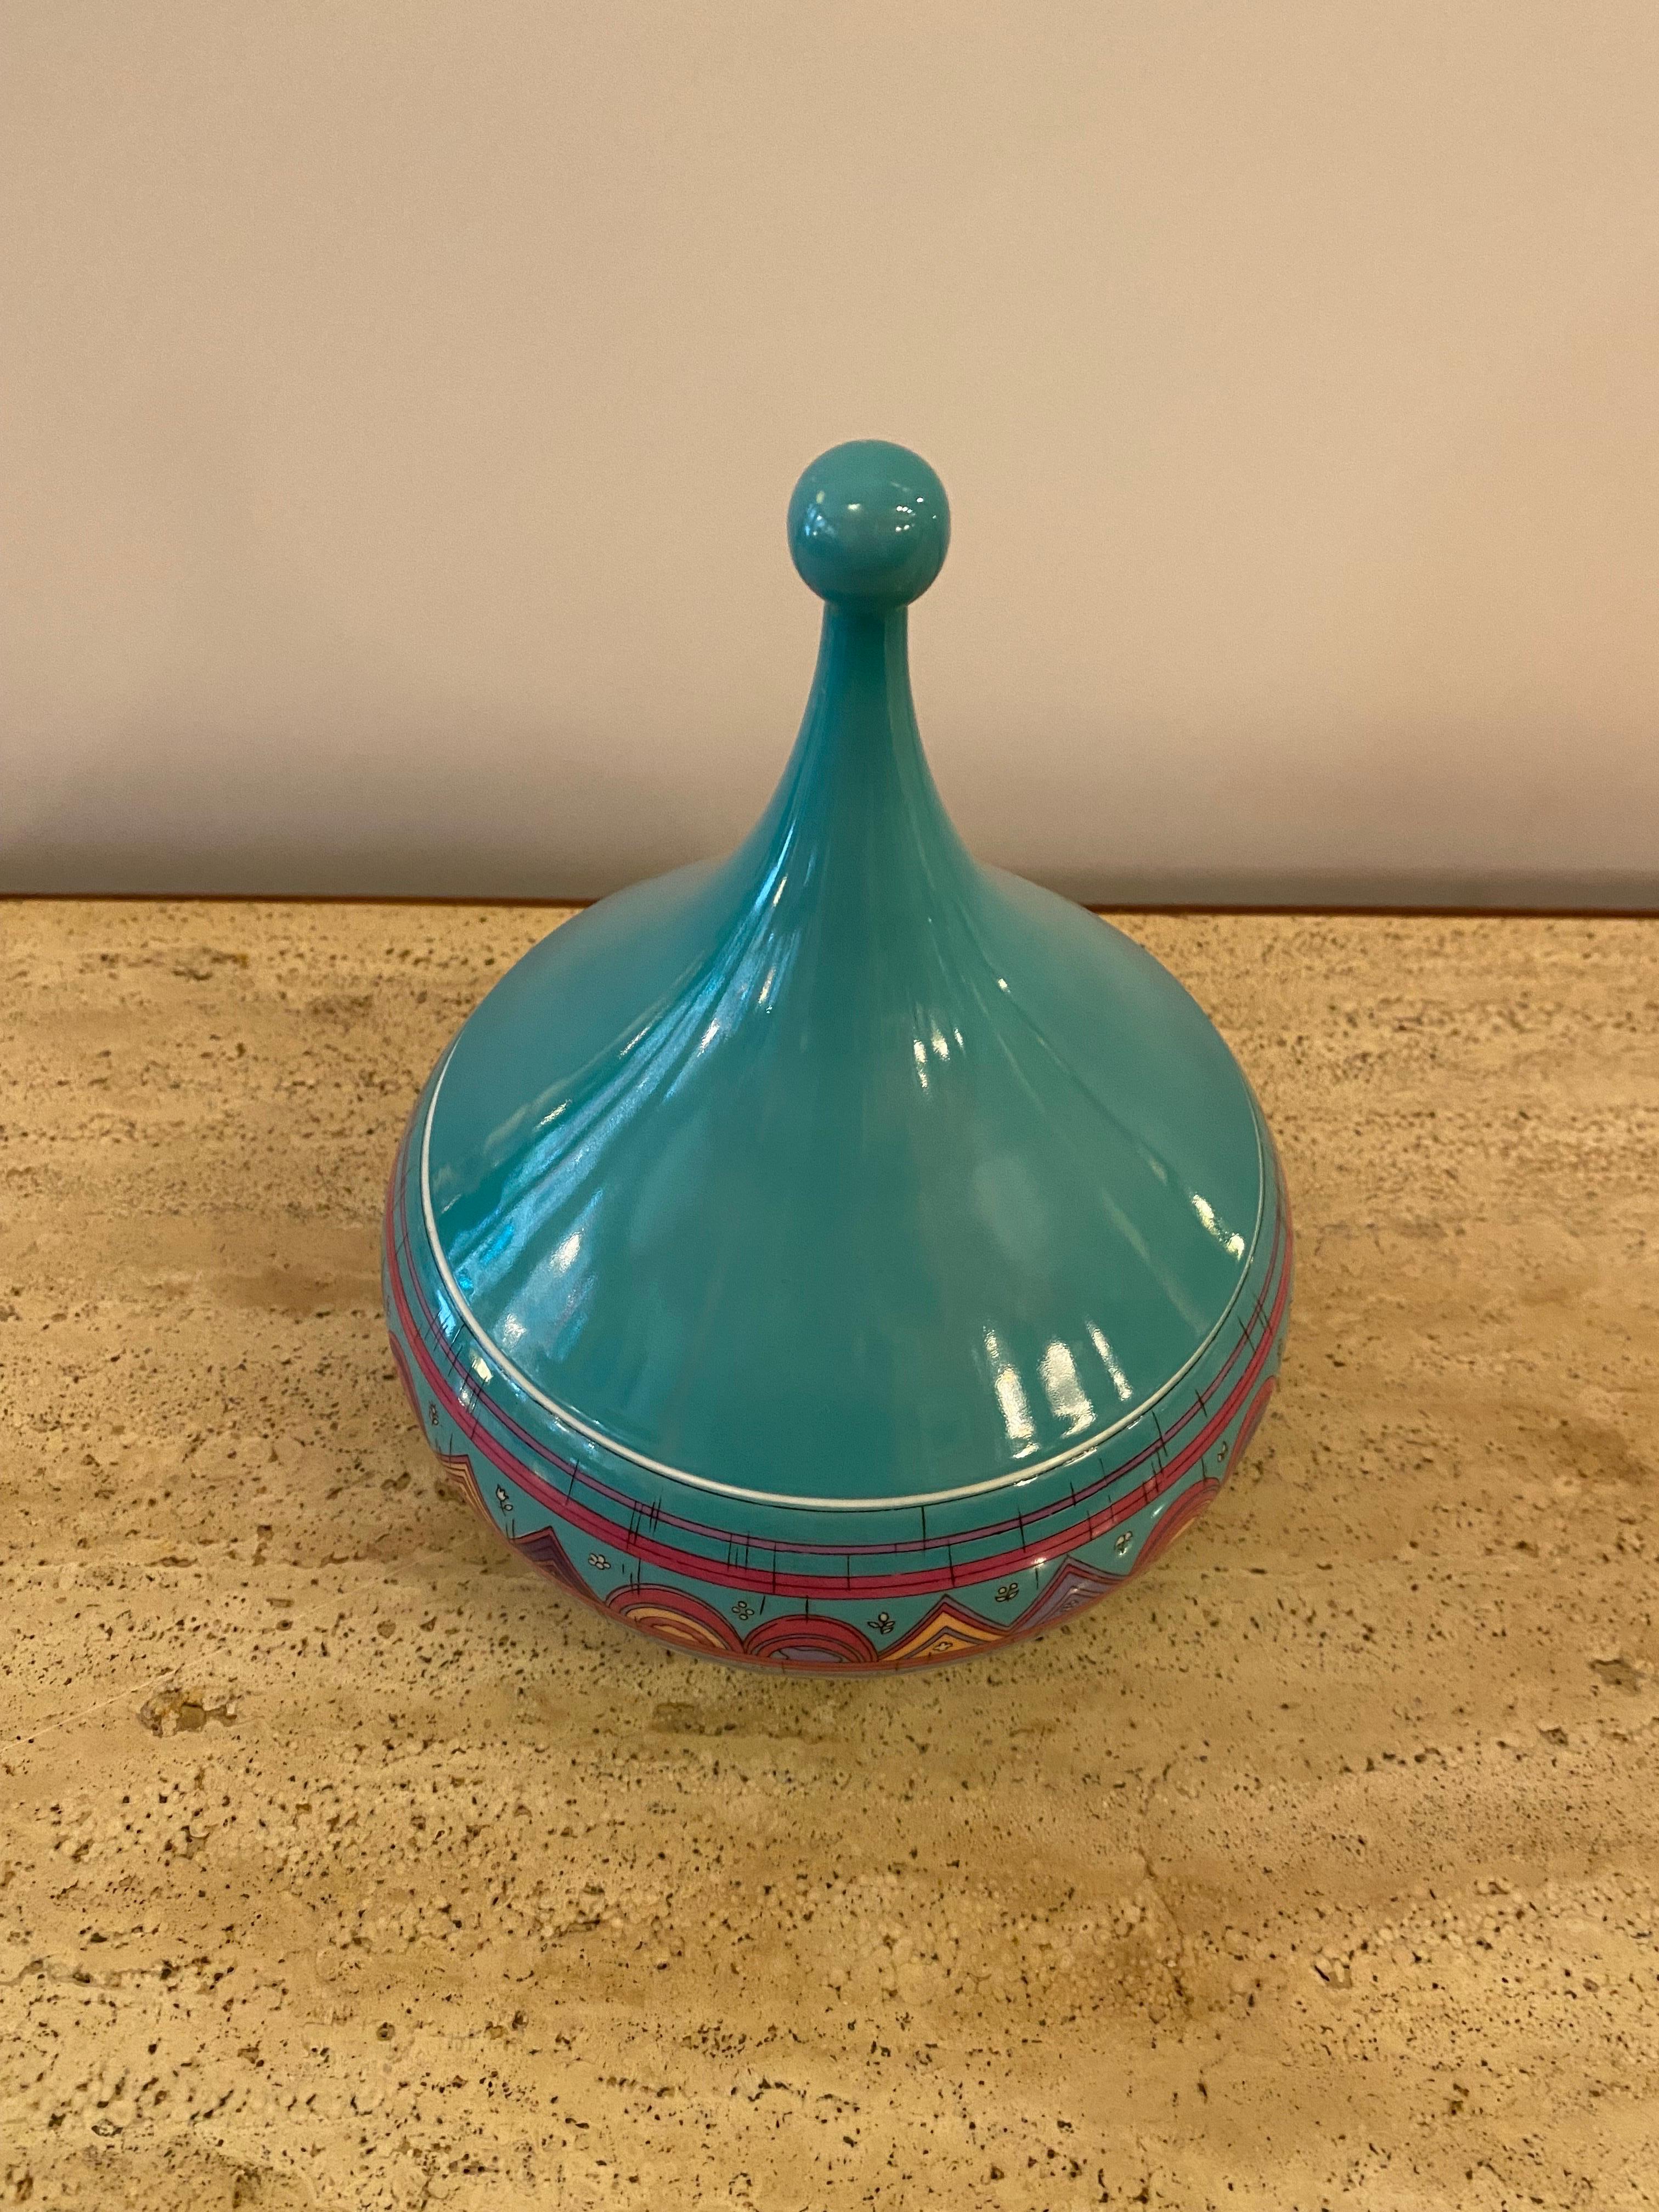 Emilio Pucci for Rosenthal Ceramic Lidded Box. Beautiful Colors, vibrant and unique.